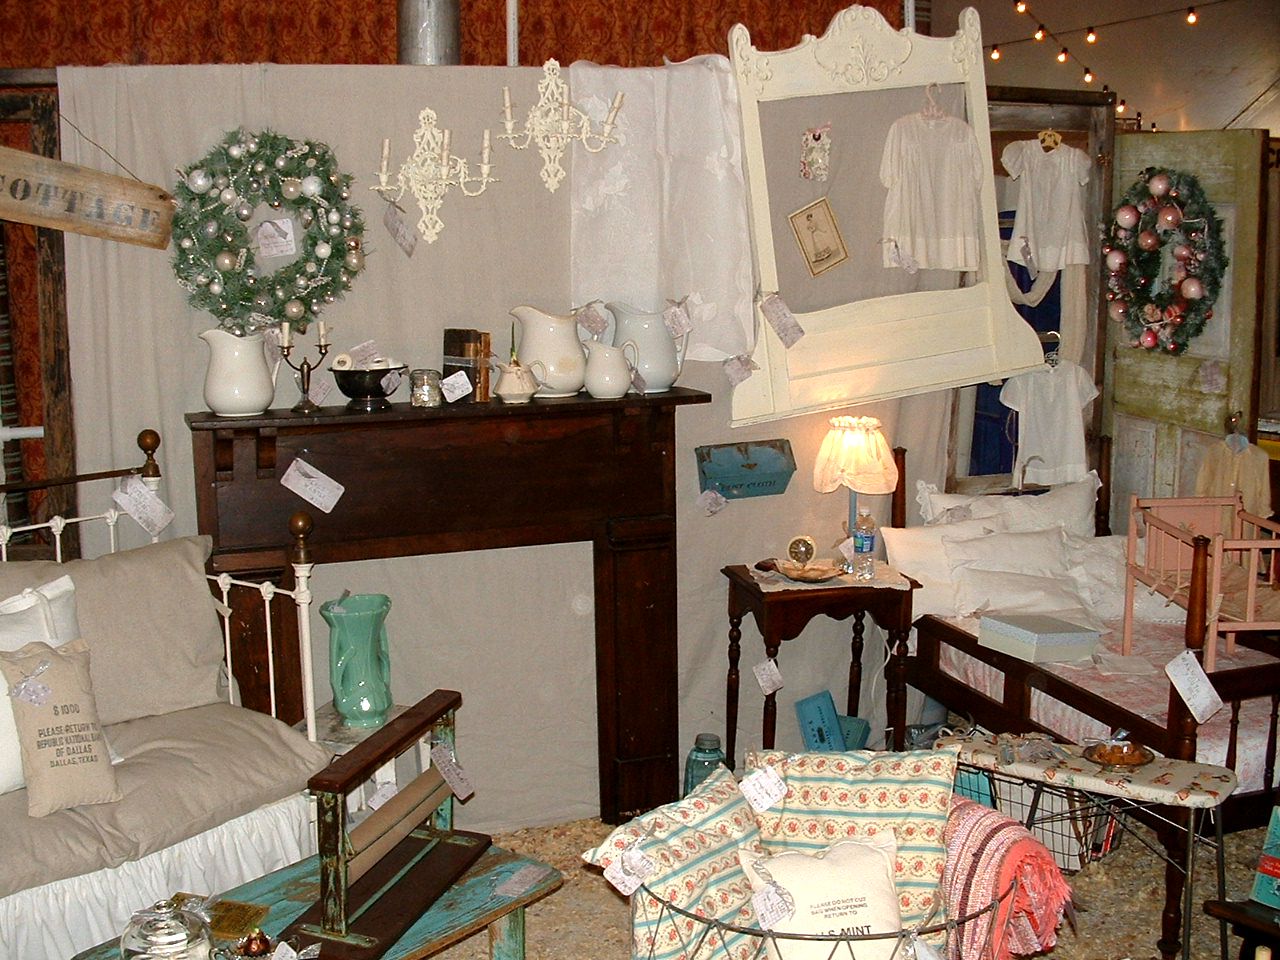 Ruby Grace's: First of Two Posts on Dealers at The Homestead Show in Hico